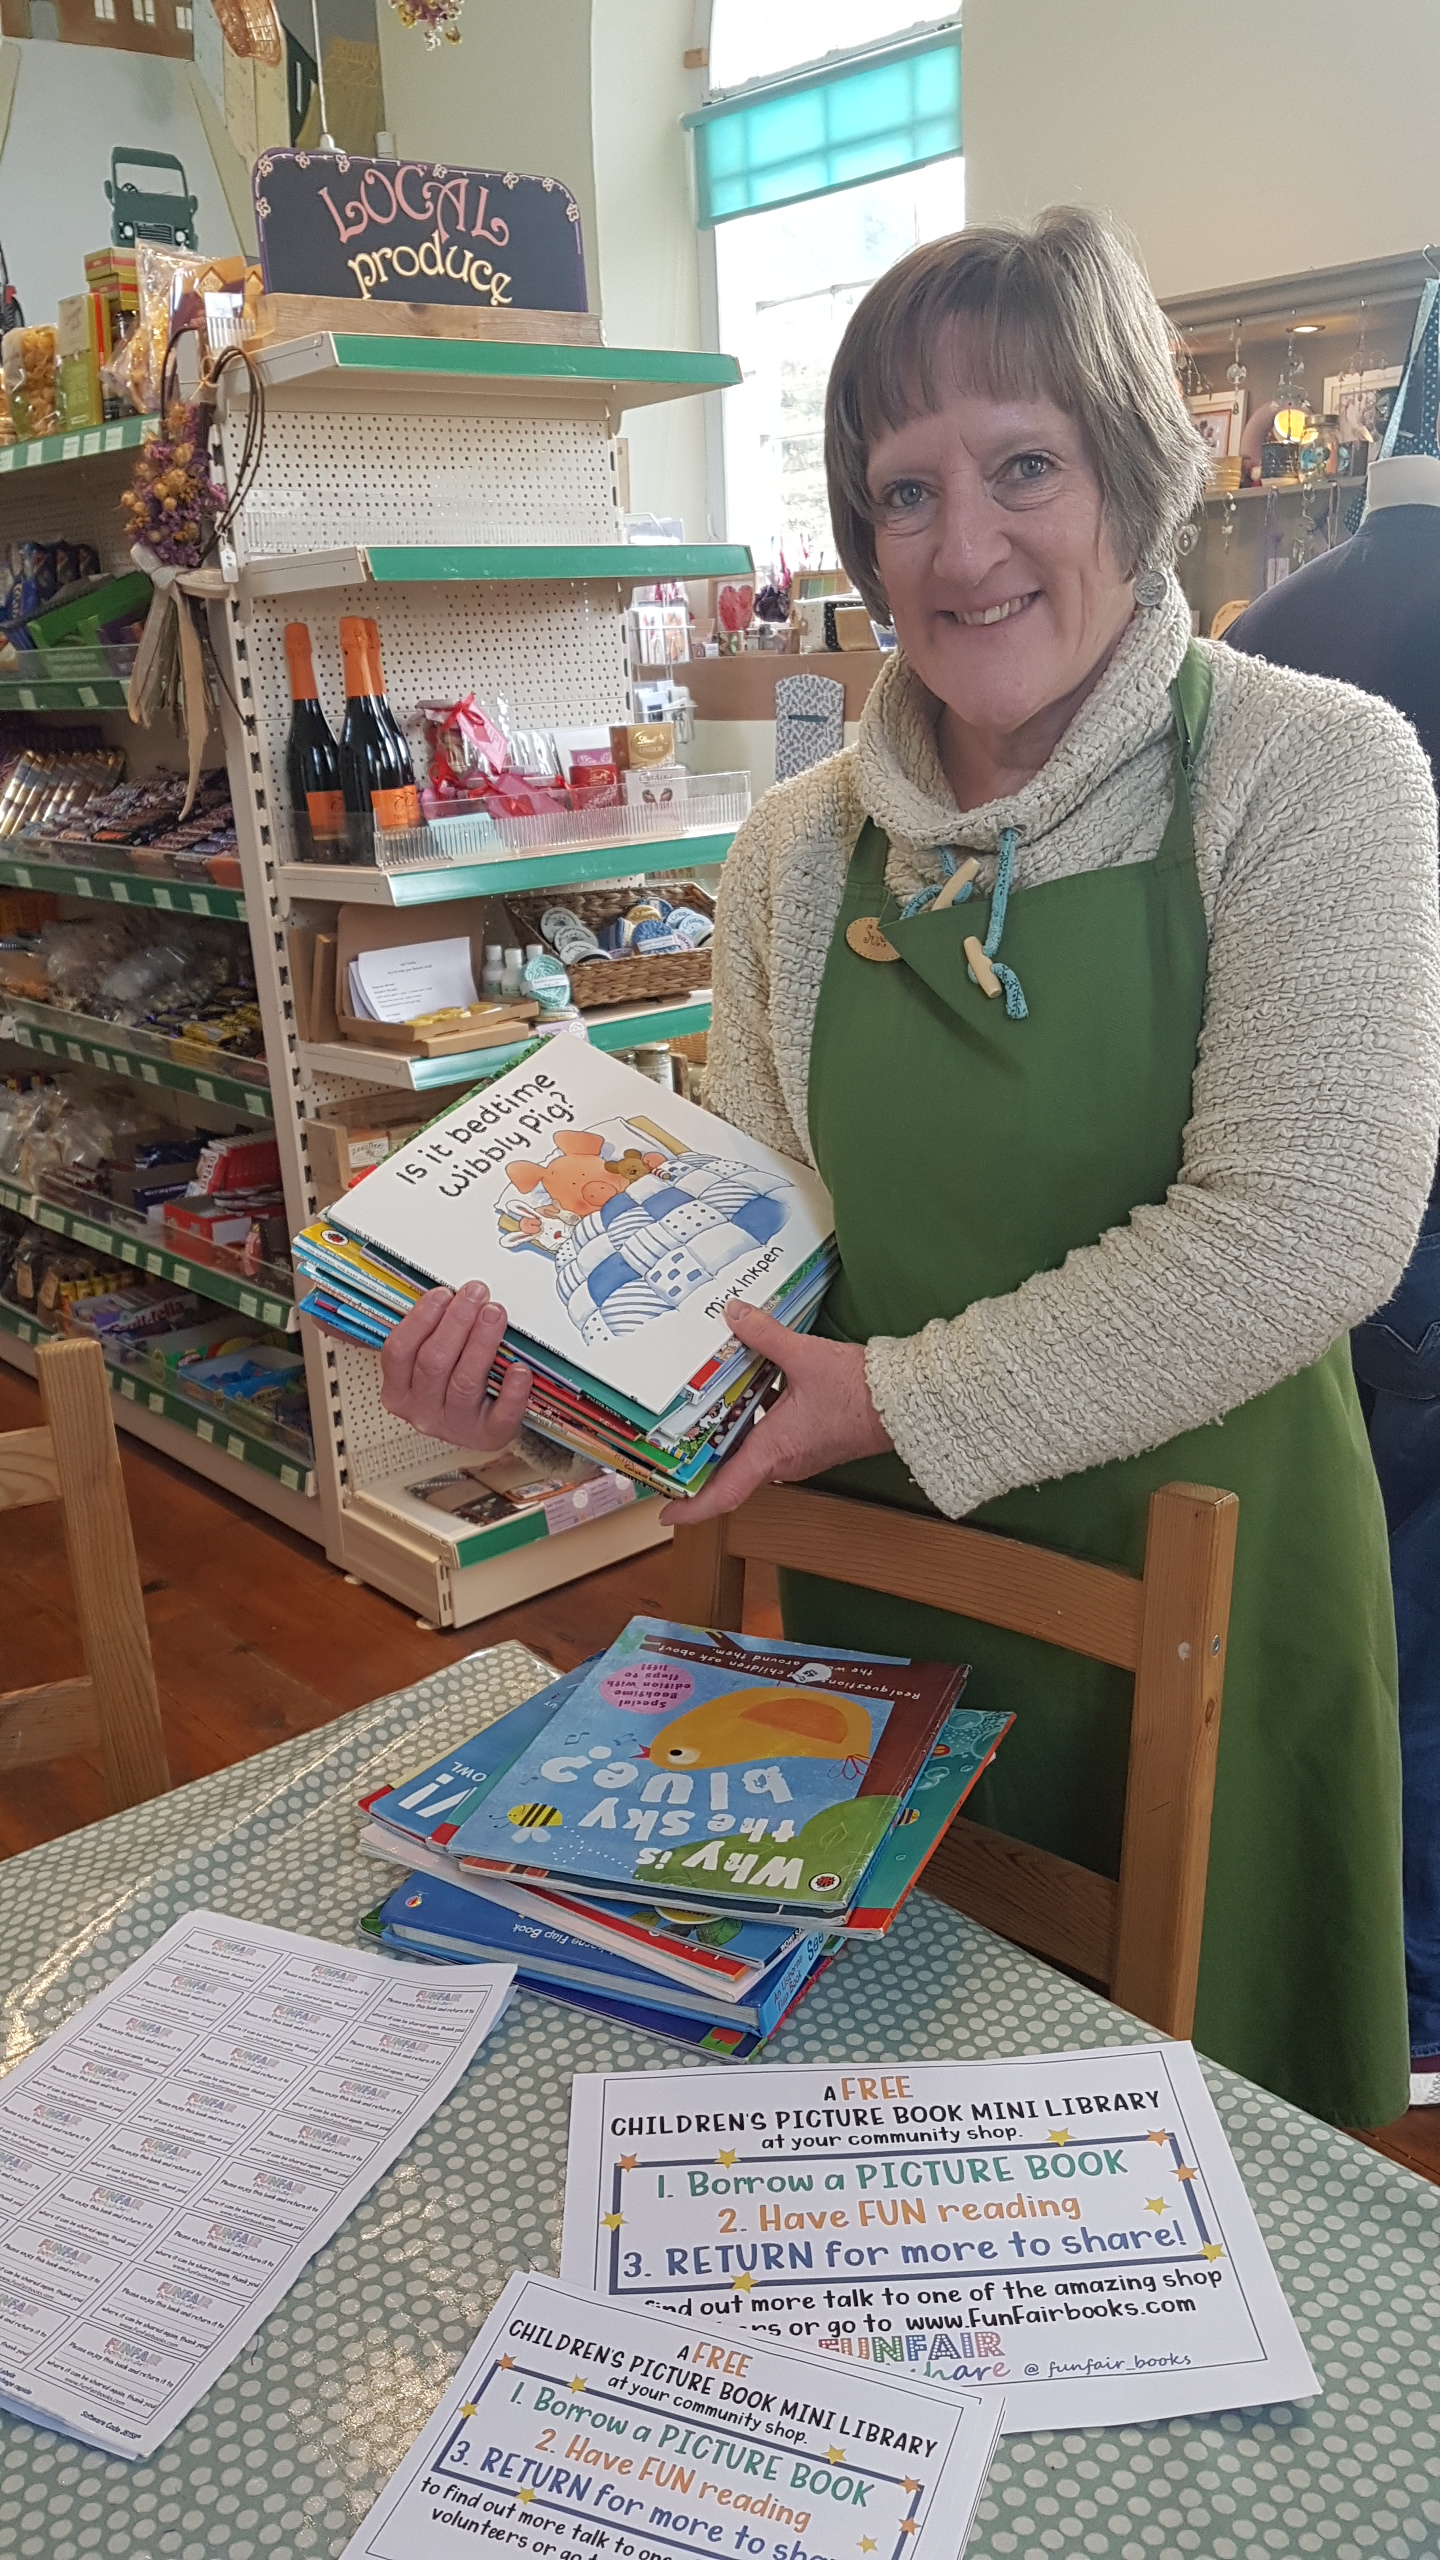 community shop manager holding up book donations received from us